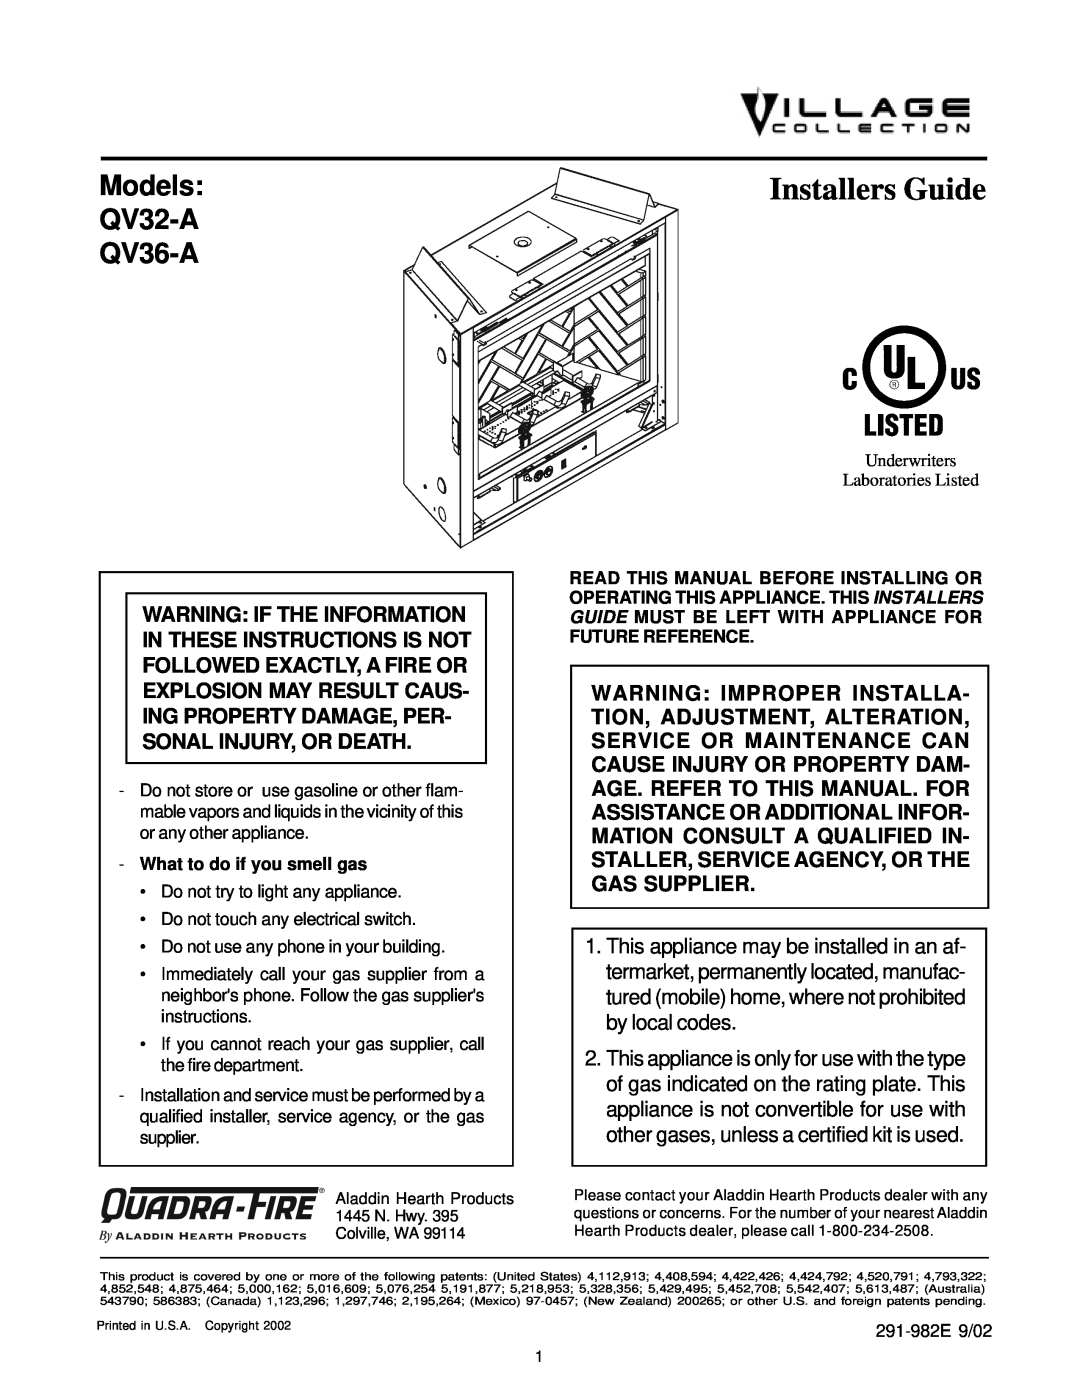 Quadra-Fire QV36-A manual What to do if you smell gas, Installers Guide, Models, QV32-A 